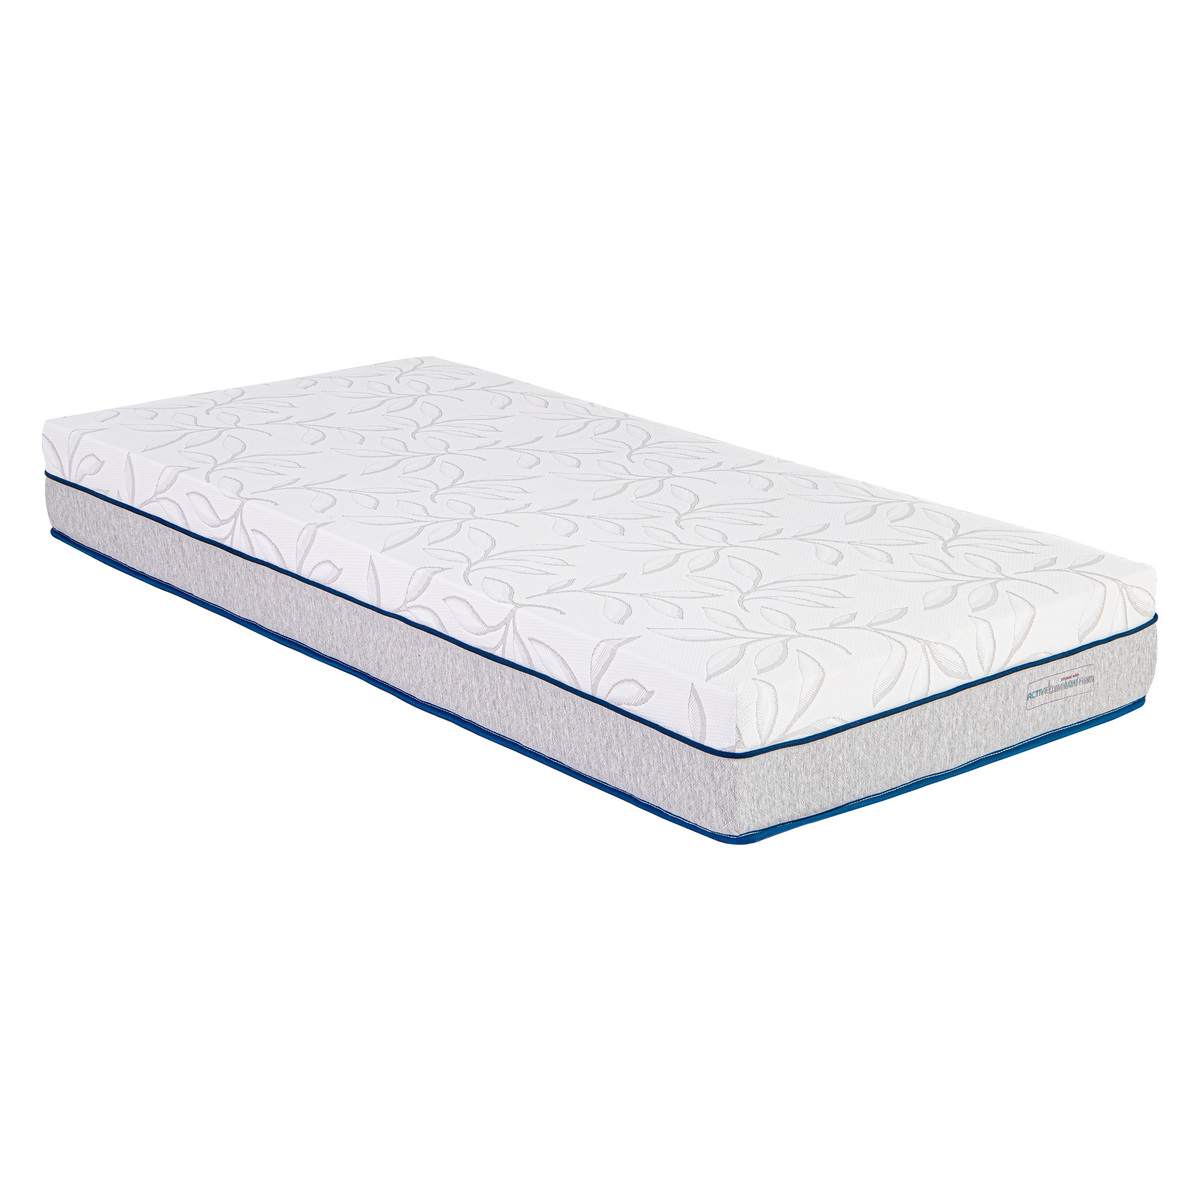 Royal Cozee Medical Gel Infused Mattress 190x180+20cm